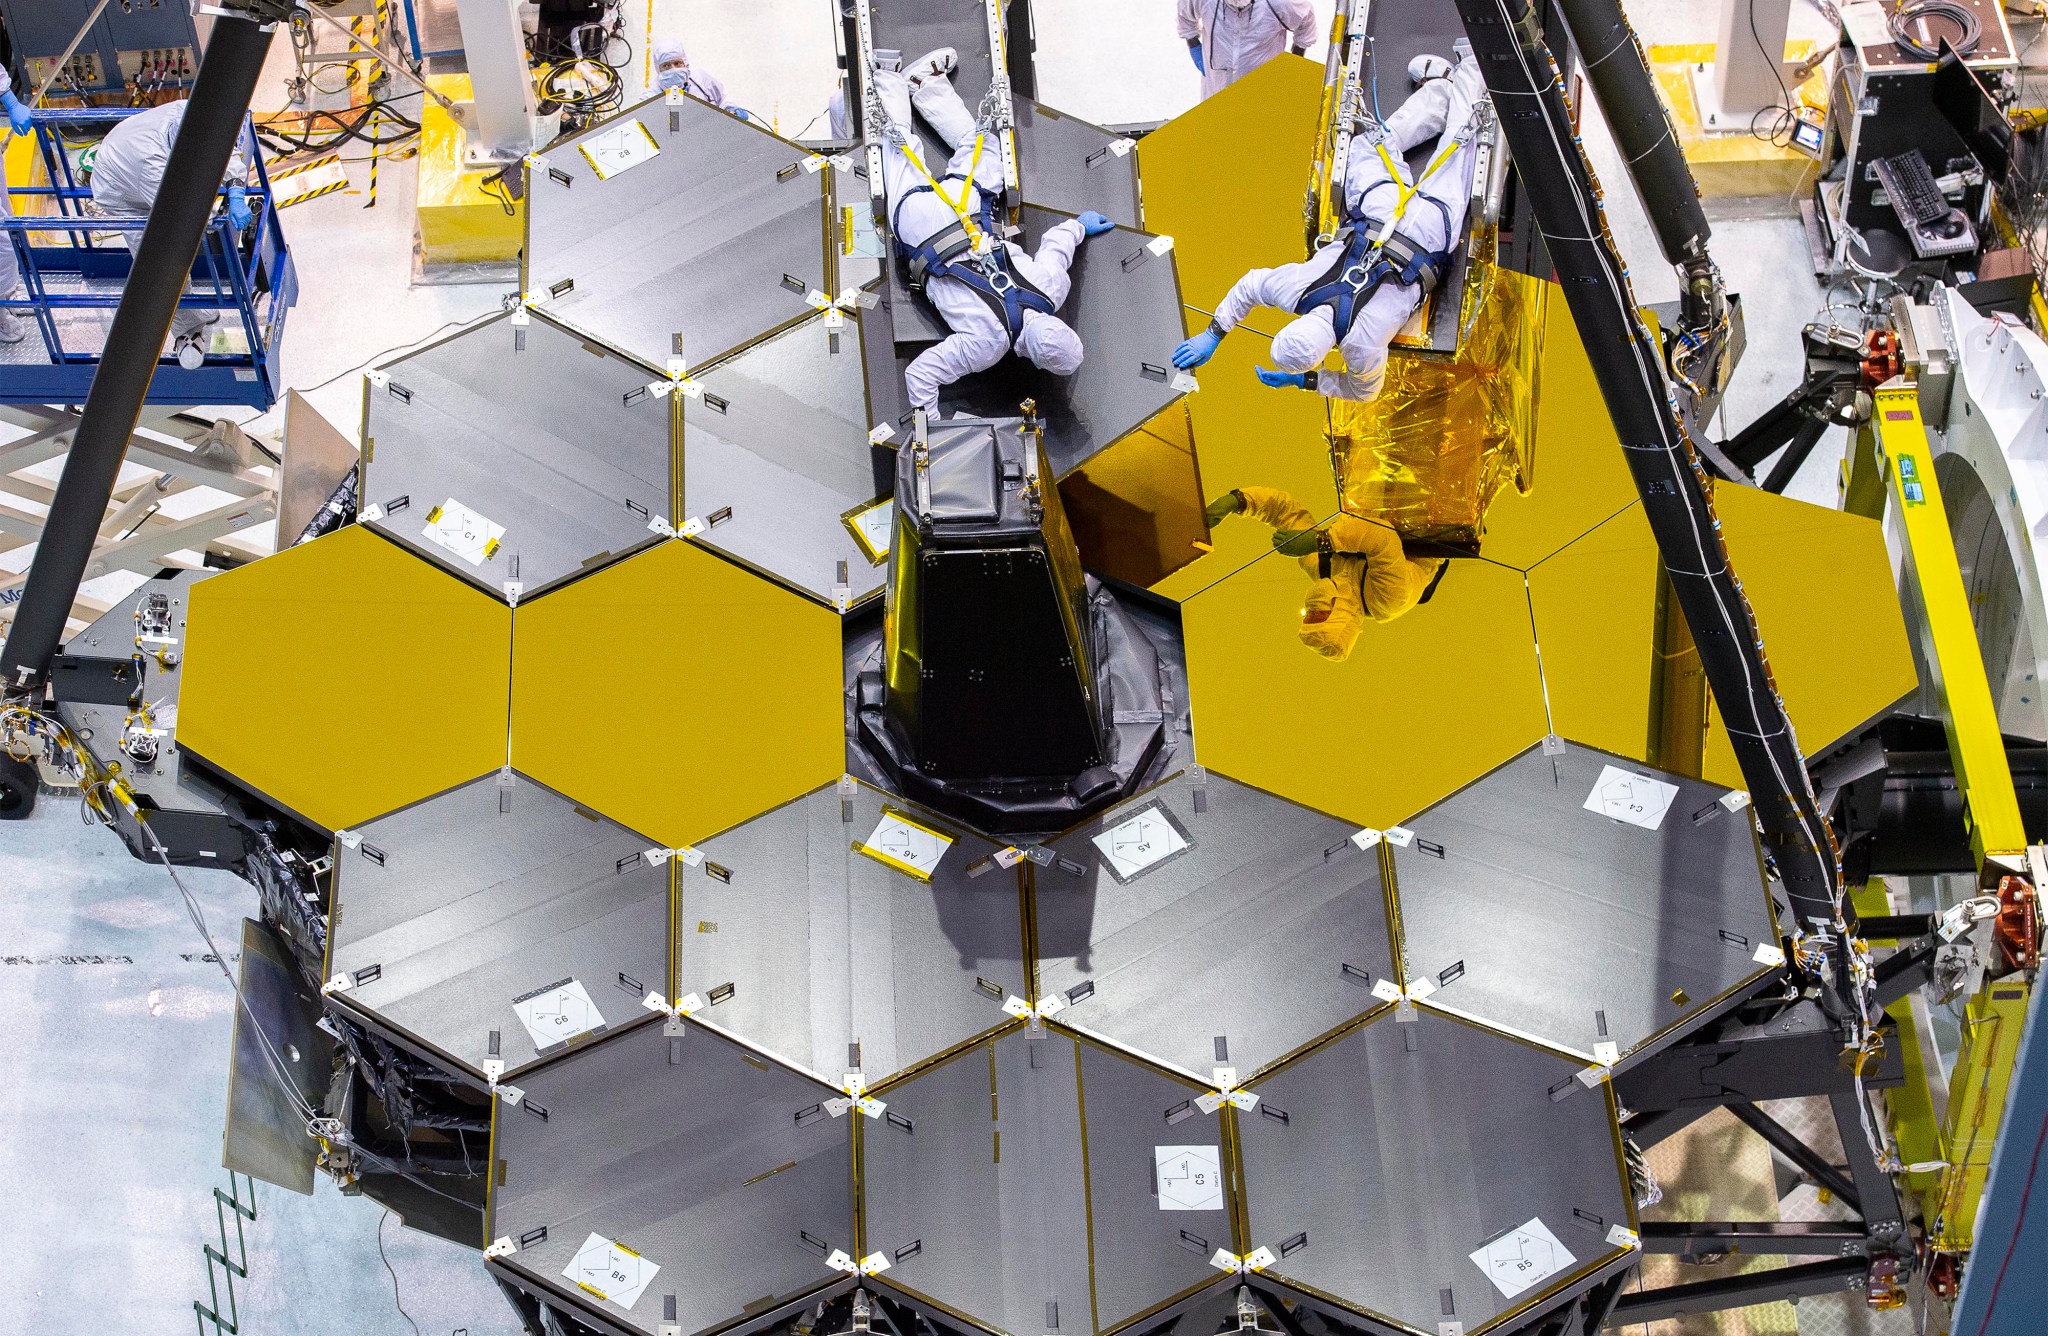 The covers being removed from the hexagonal gold mirrors of the James Webb Space Telescope. Two people in cleanroom “bunny” suits lay on diving boards over the mirror, which lays face pointed up, very carefully removing the covers one at a time. In this photo 6 covers have been removed, revealing the golden mirrors beneath. These are the 4 center line mirrors and two in the 4 and 5 o’clock positions. The two workers each hold part of another cover as they remove it. The worker on the right is reflected in the mirrors. Each of the black covers has a white sign on it noting which mirror segment it is. Each segment has a unique designation including A, B, or C and 1, 2, 3, 4, 5, or 6 depending on its prescription and location.